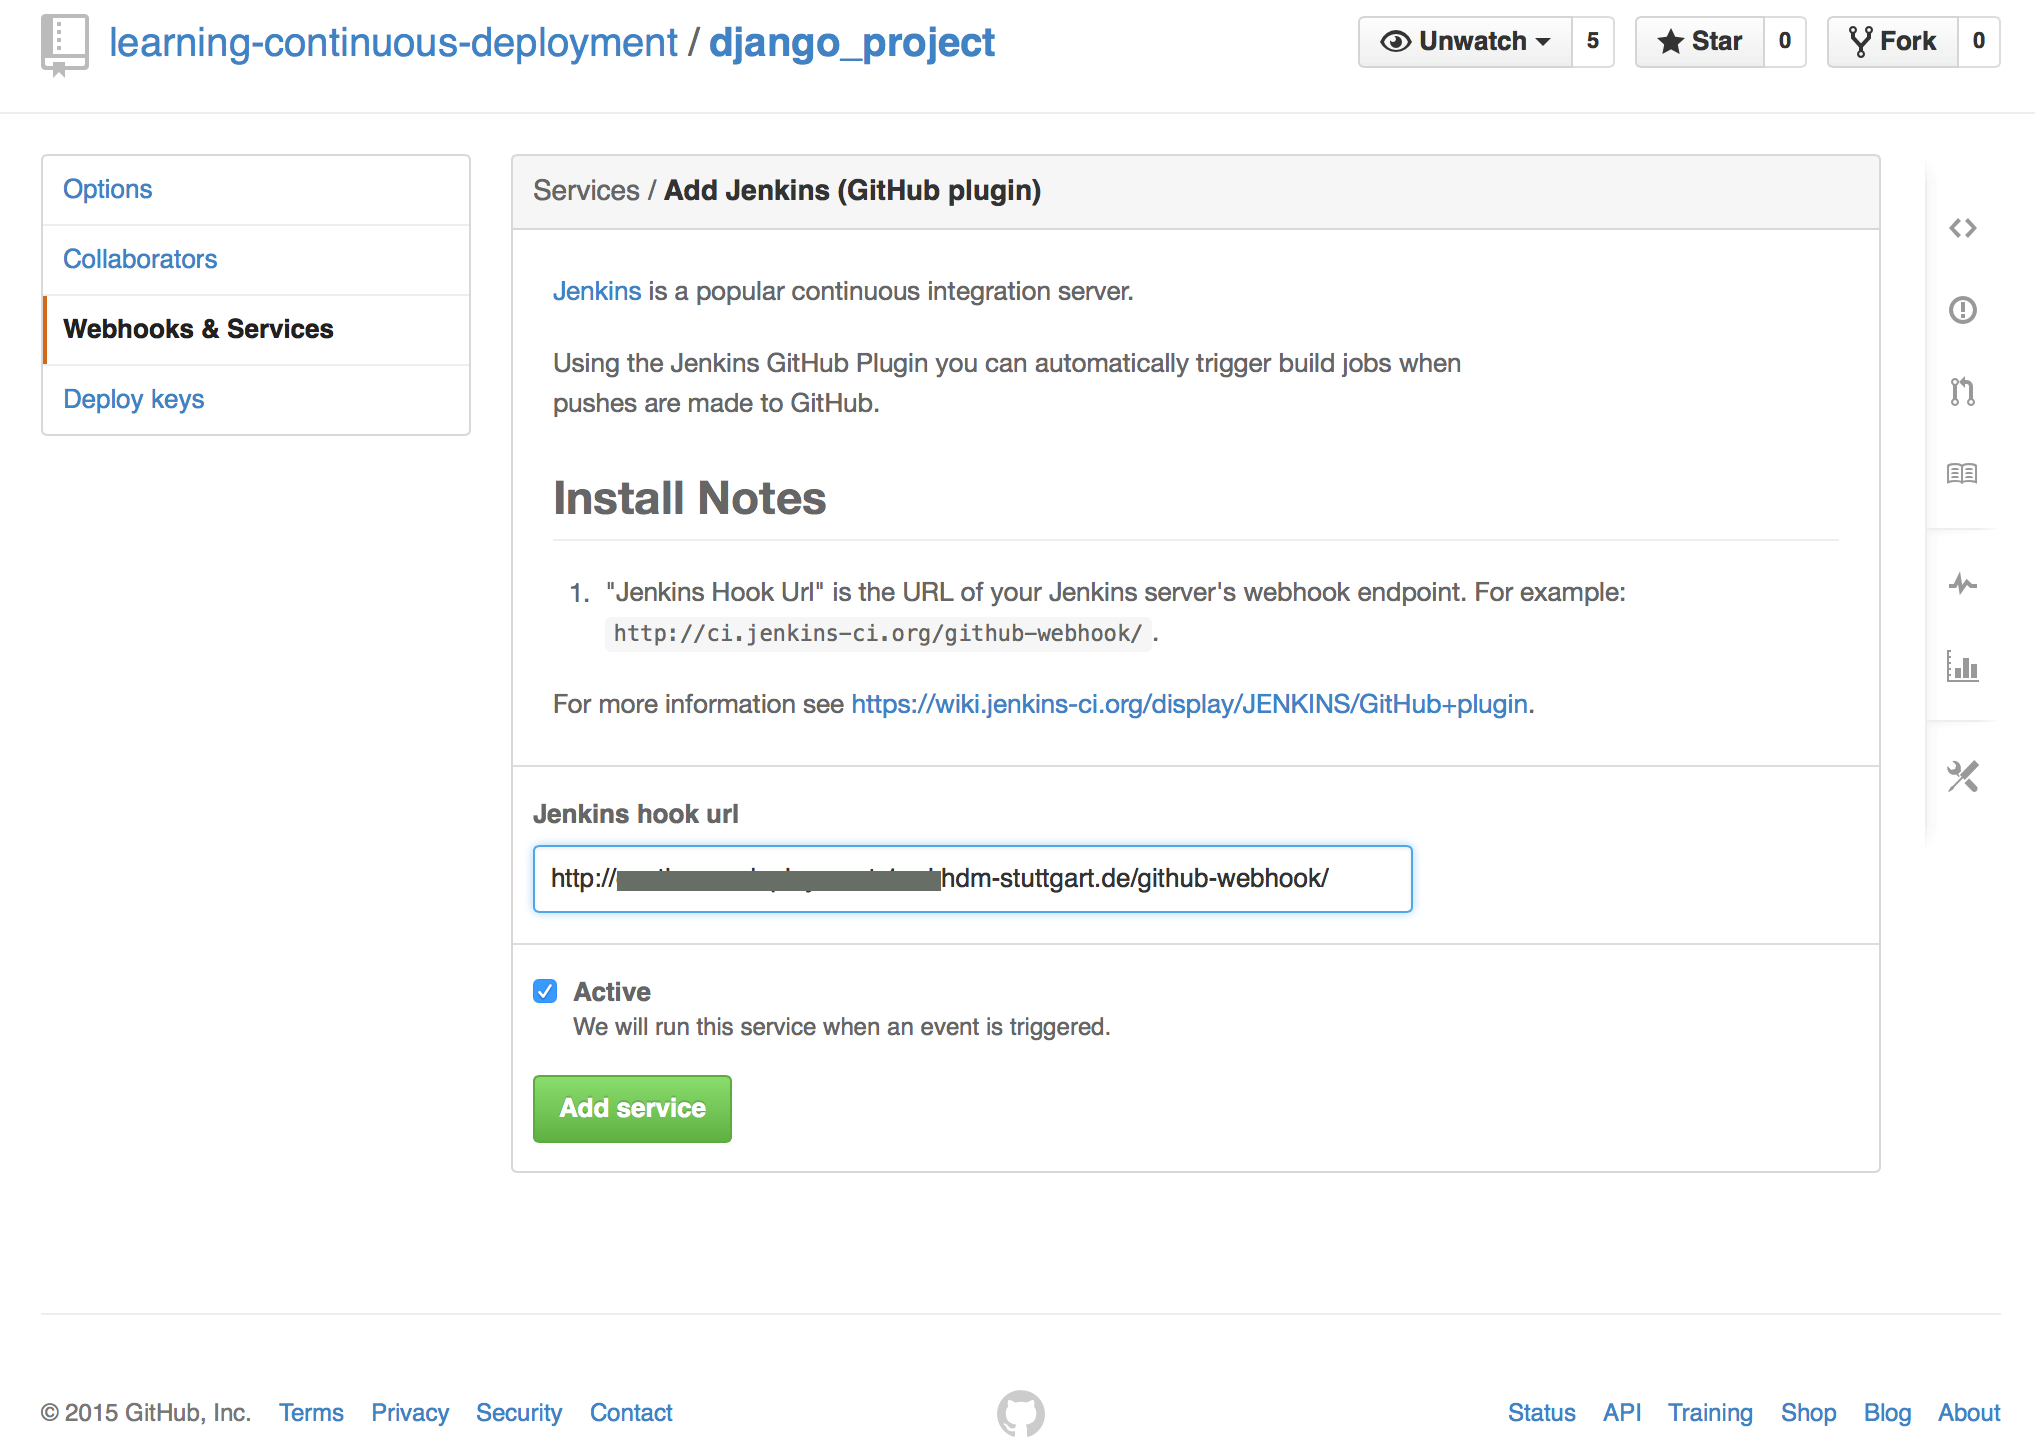 Configure the GitHub project service